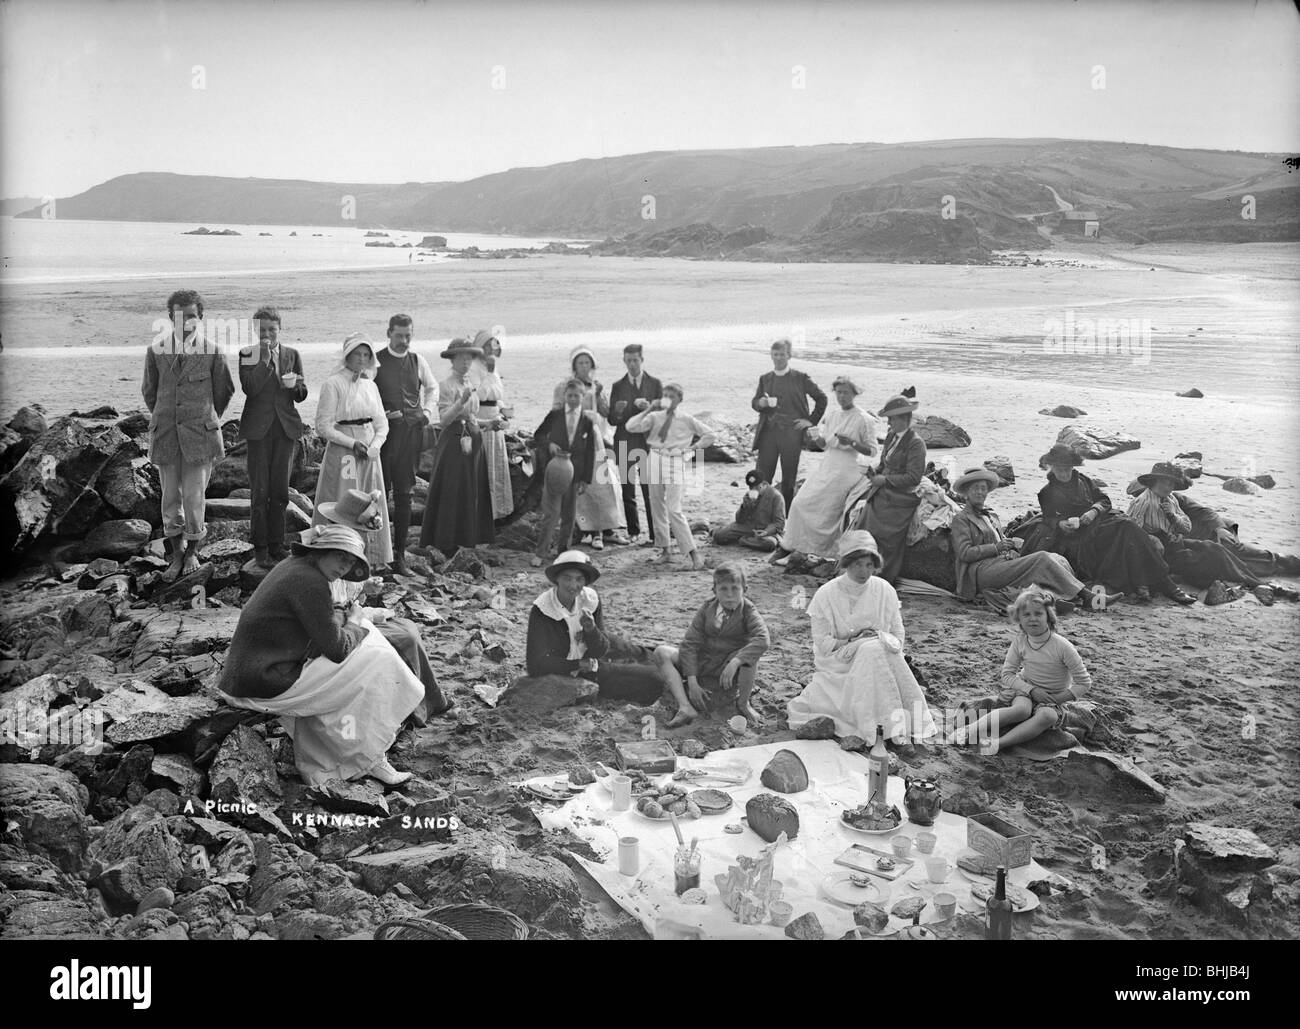 A picnic on the beach, Kennack Sands, Cornwall, c1896-c1920. Artist: Alfred Newton & Sons Stock Photo